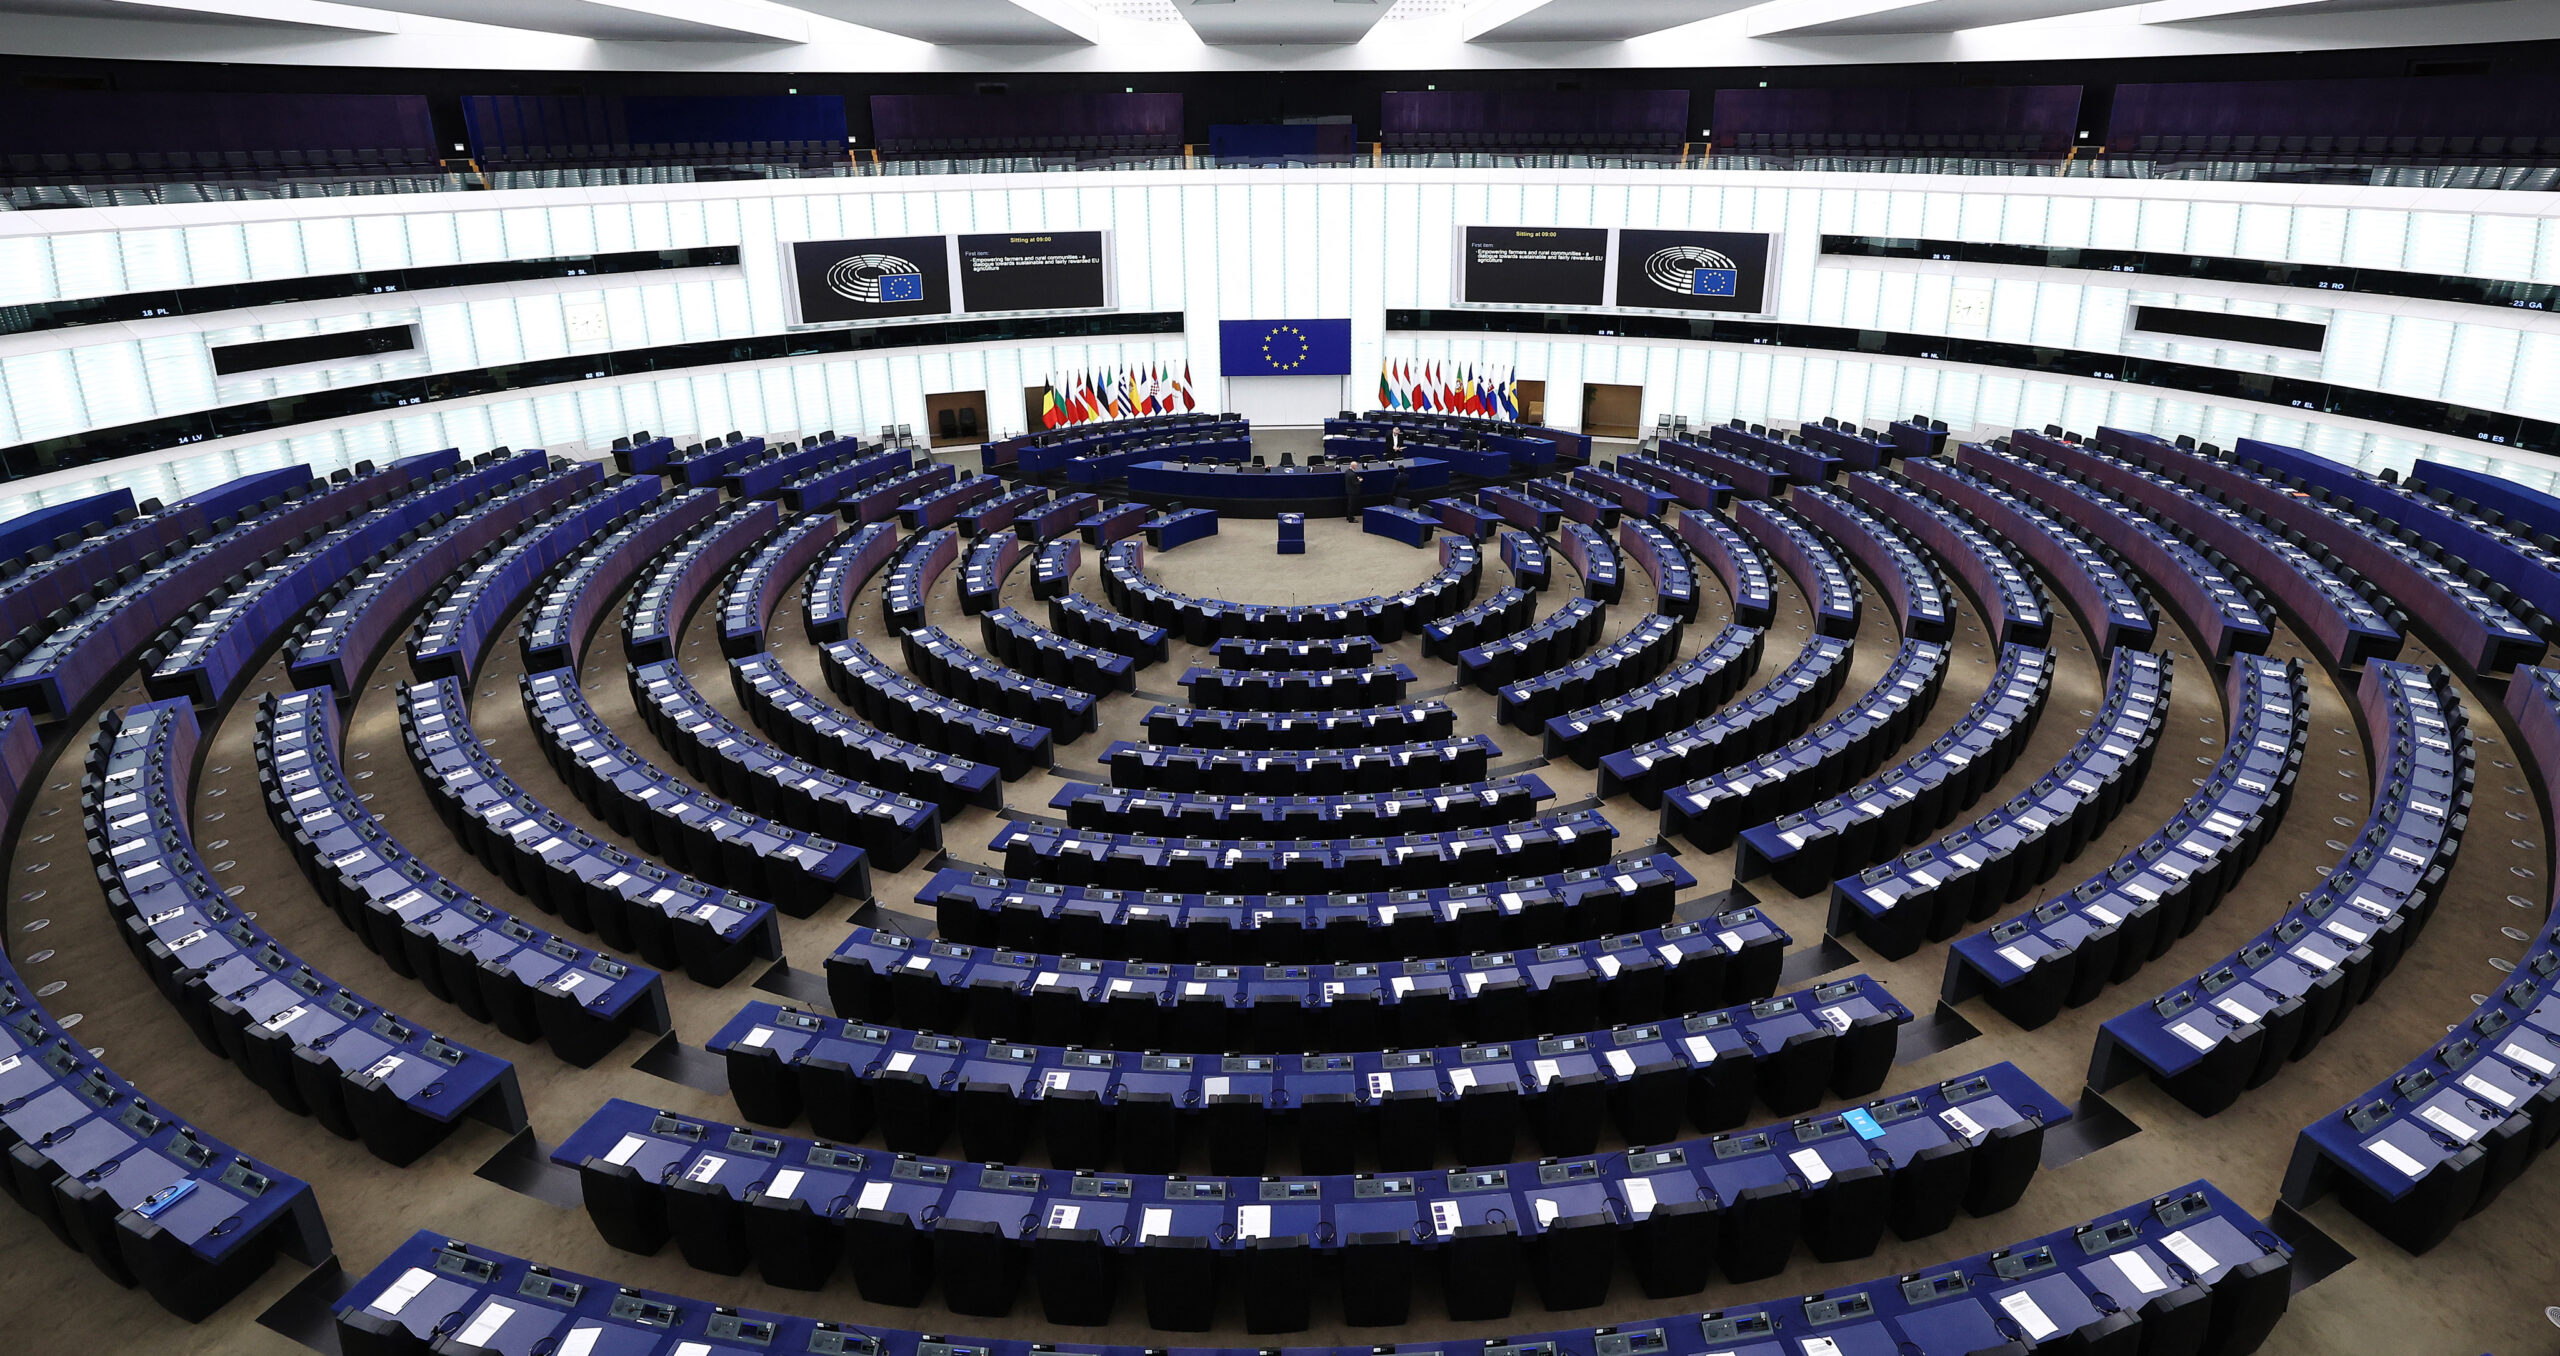 A view of the hemicycle at the European Parliament in Strasbourg, eastern France